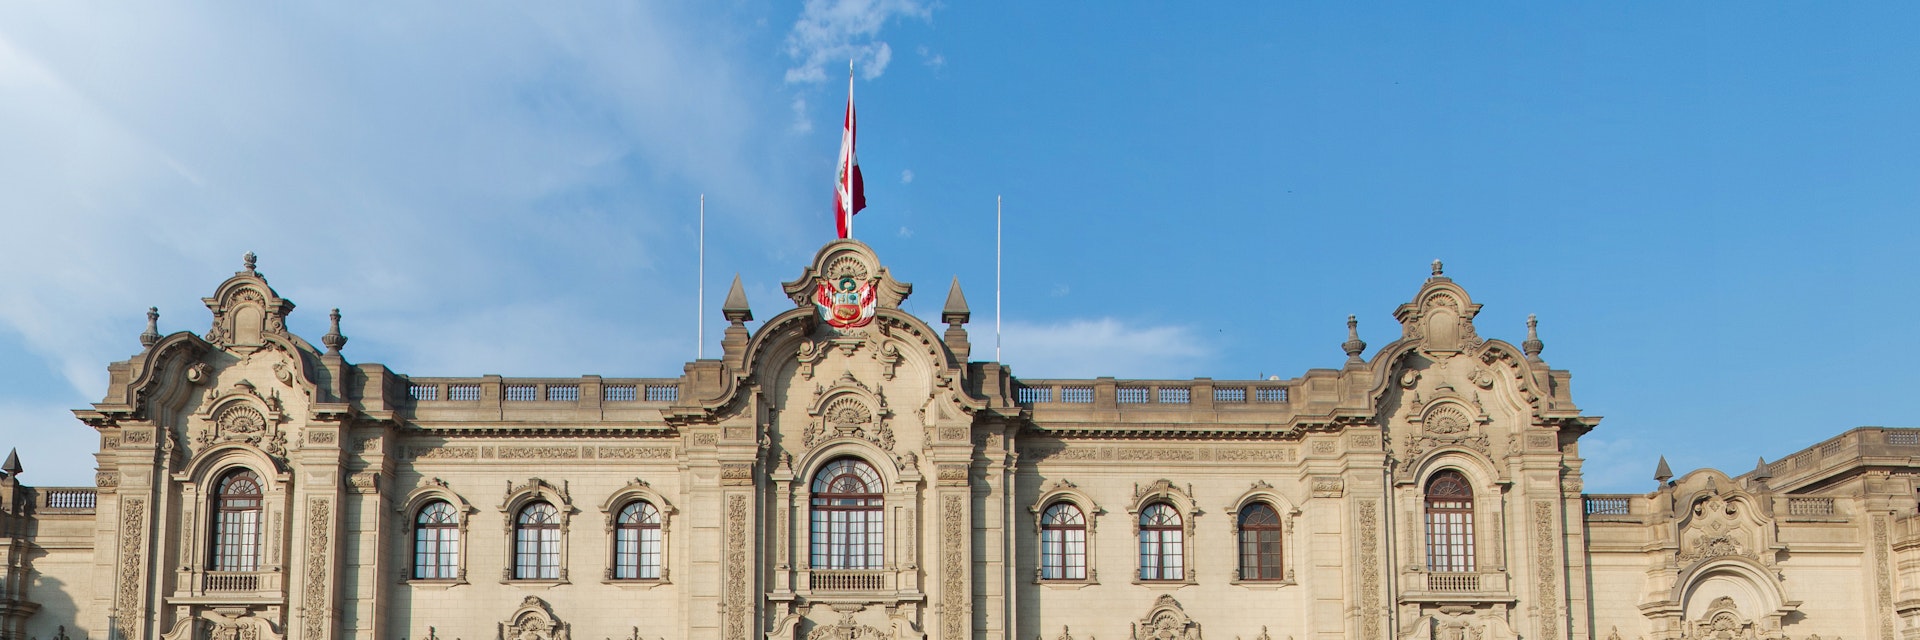 Government Palace in Lima Peru; Shutterstock ID 91332674; Your name (First / Last): Josh Vogel; GL account no.: 56530; Netsuite department name: Online Design; Full Product or Project name including edition: Digital Content/Sights